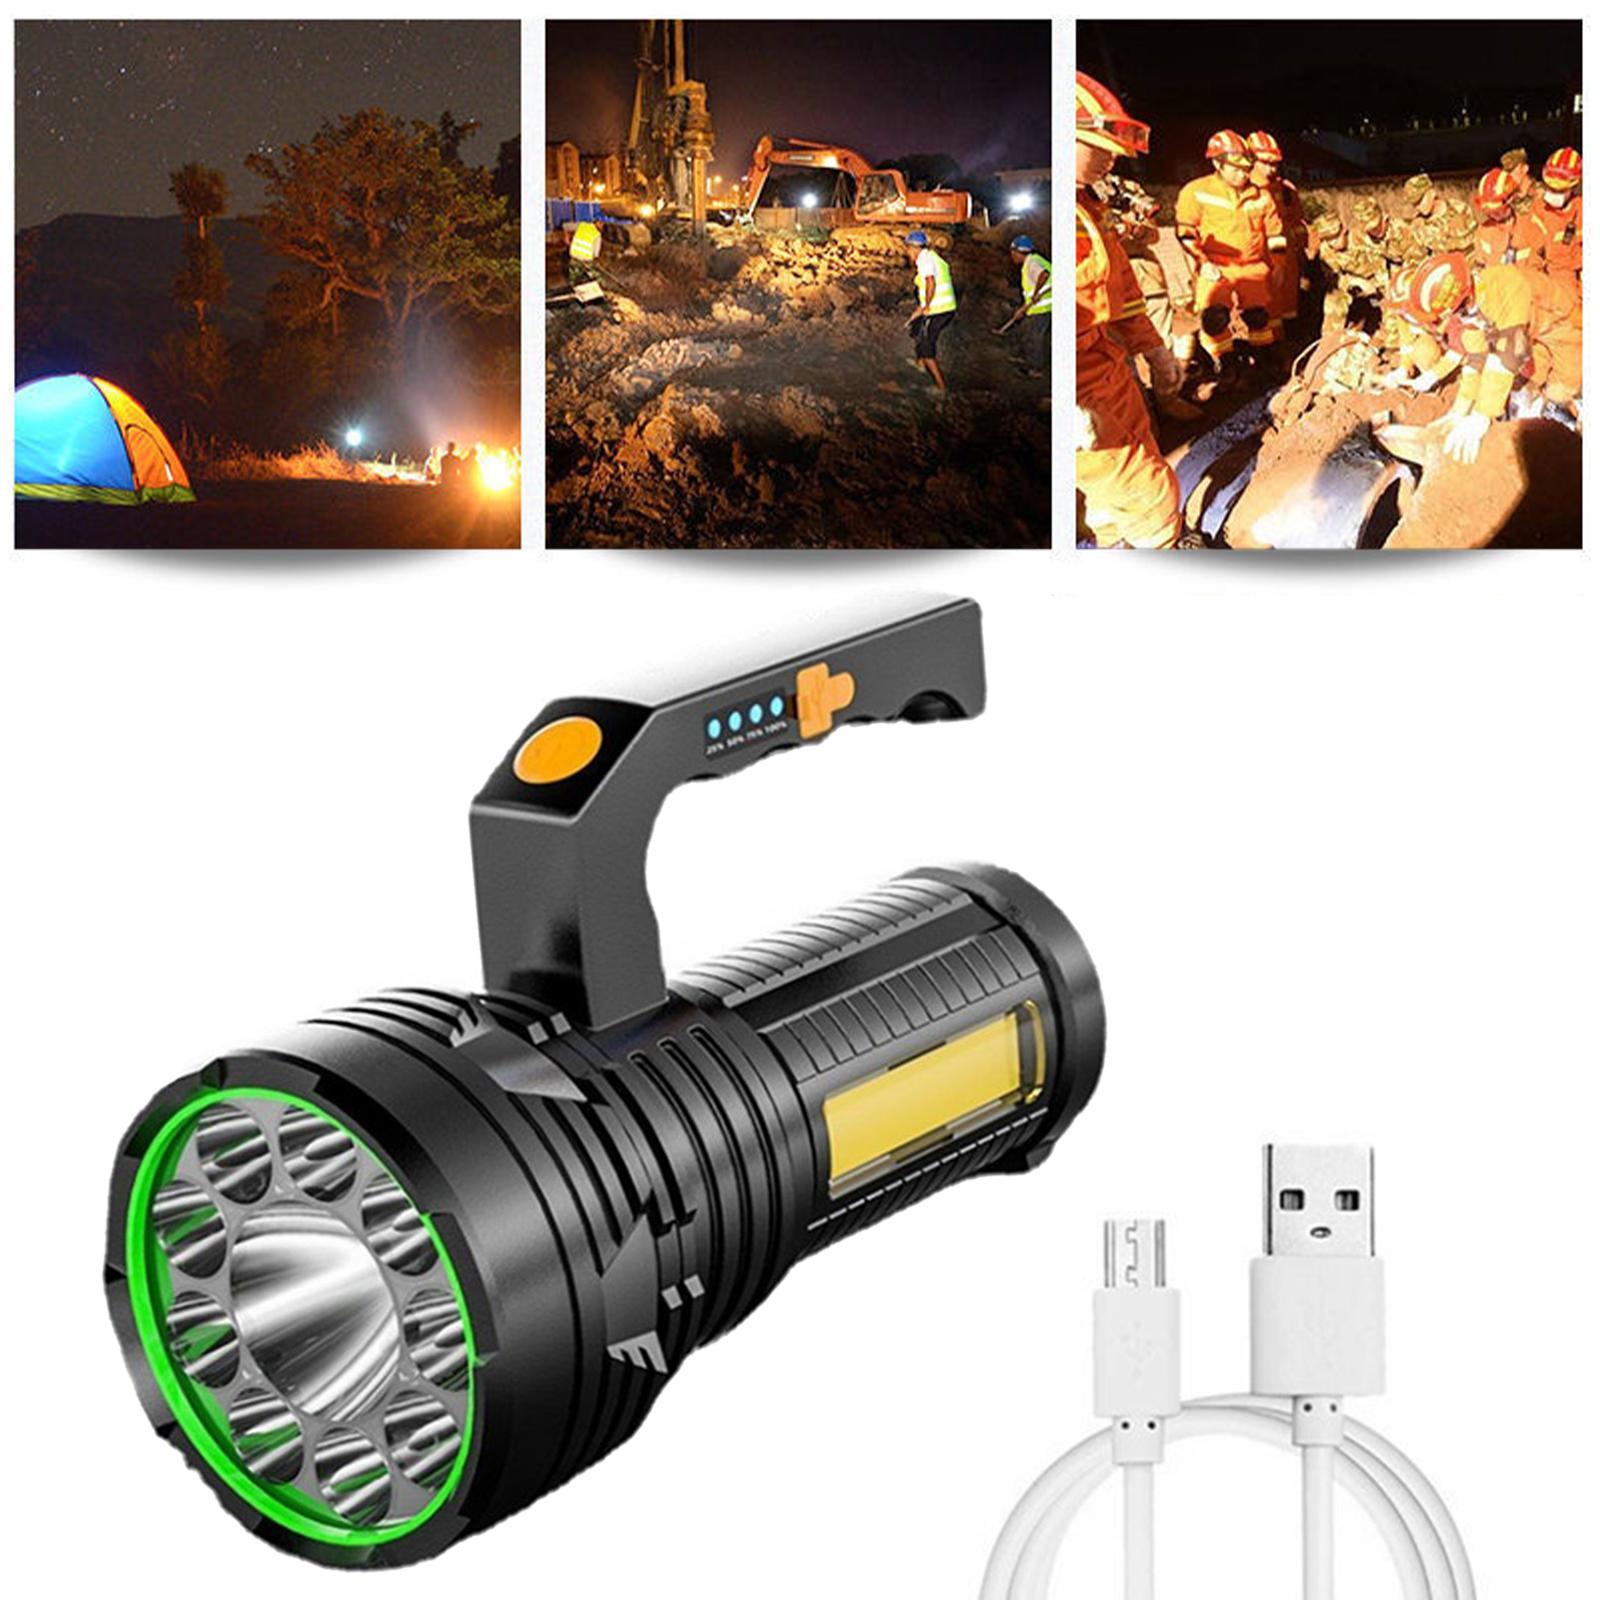 Super Bright LED Flashlight Rechargeable Camping Tactical Lamp Spotlight